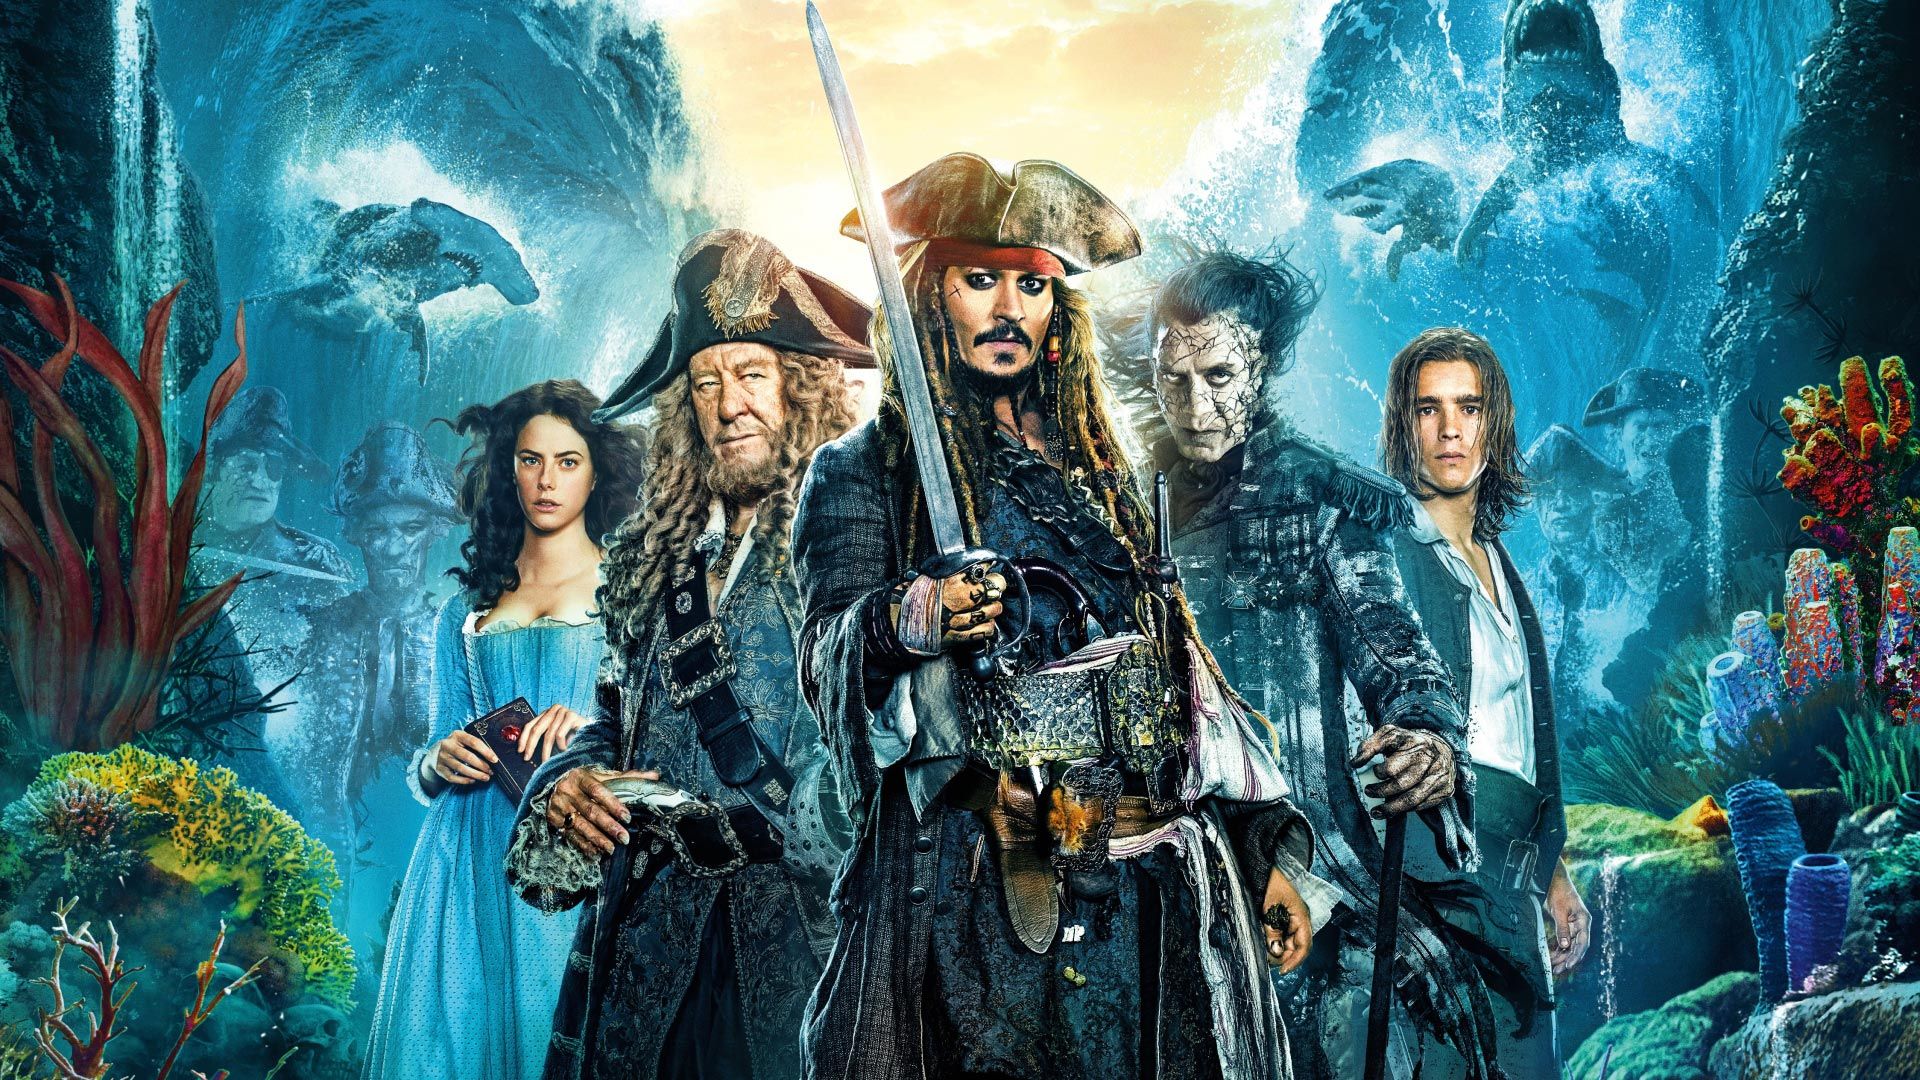 Pirates of the Caribbean 5 Theme for Windows 10